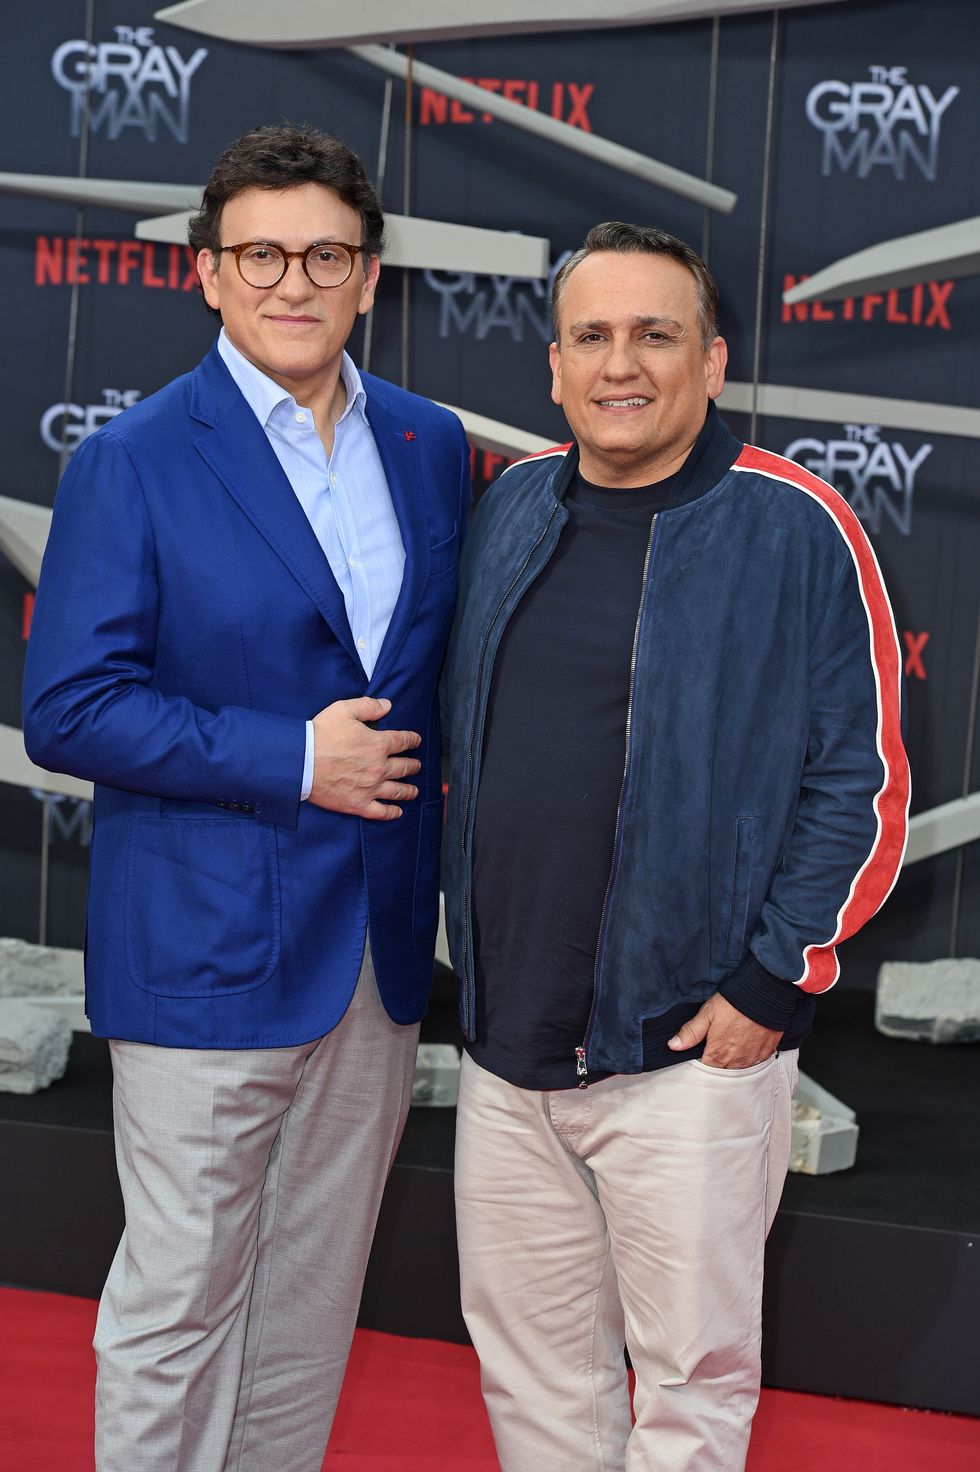 Anthony Russo, Joe Russo, L'homme gris